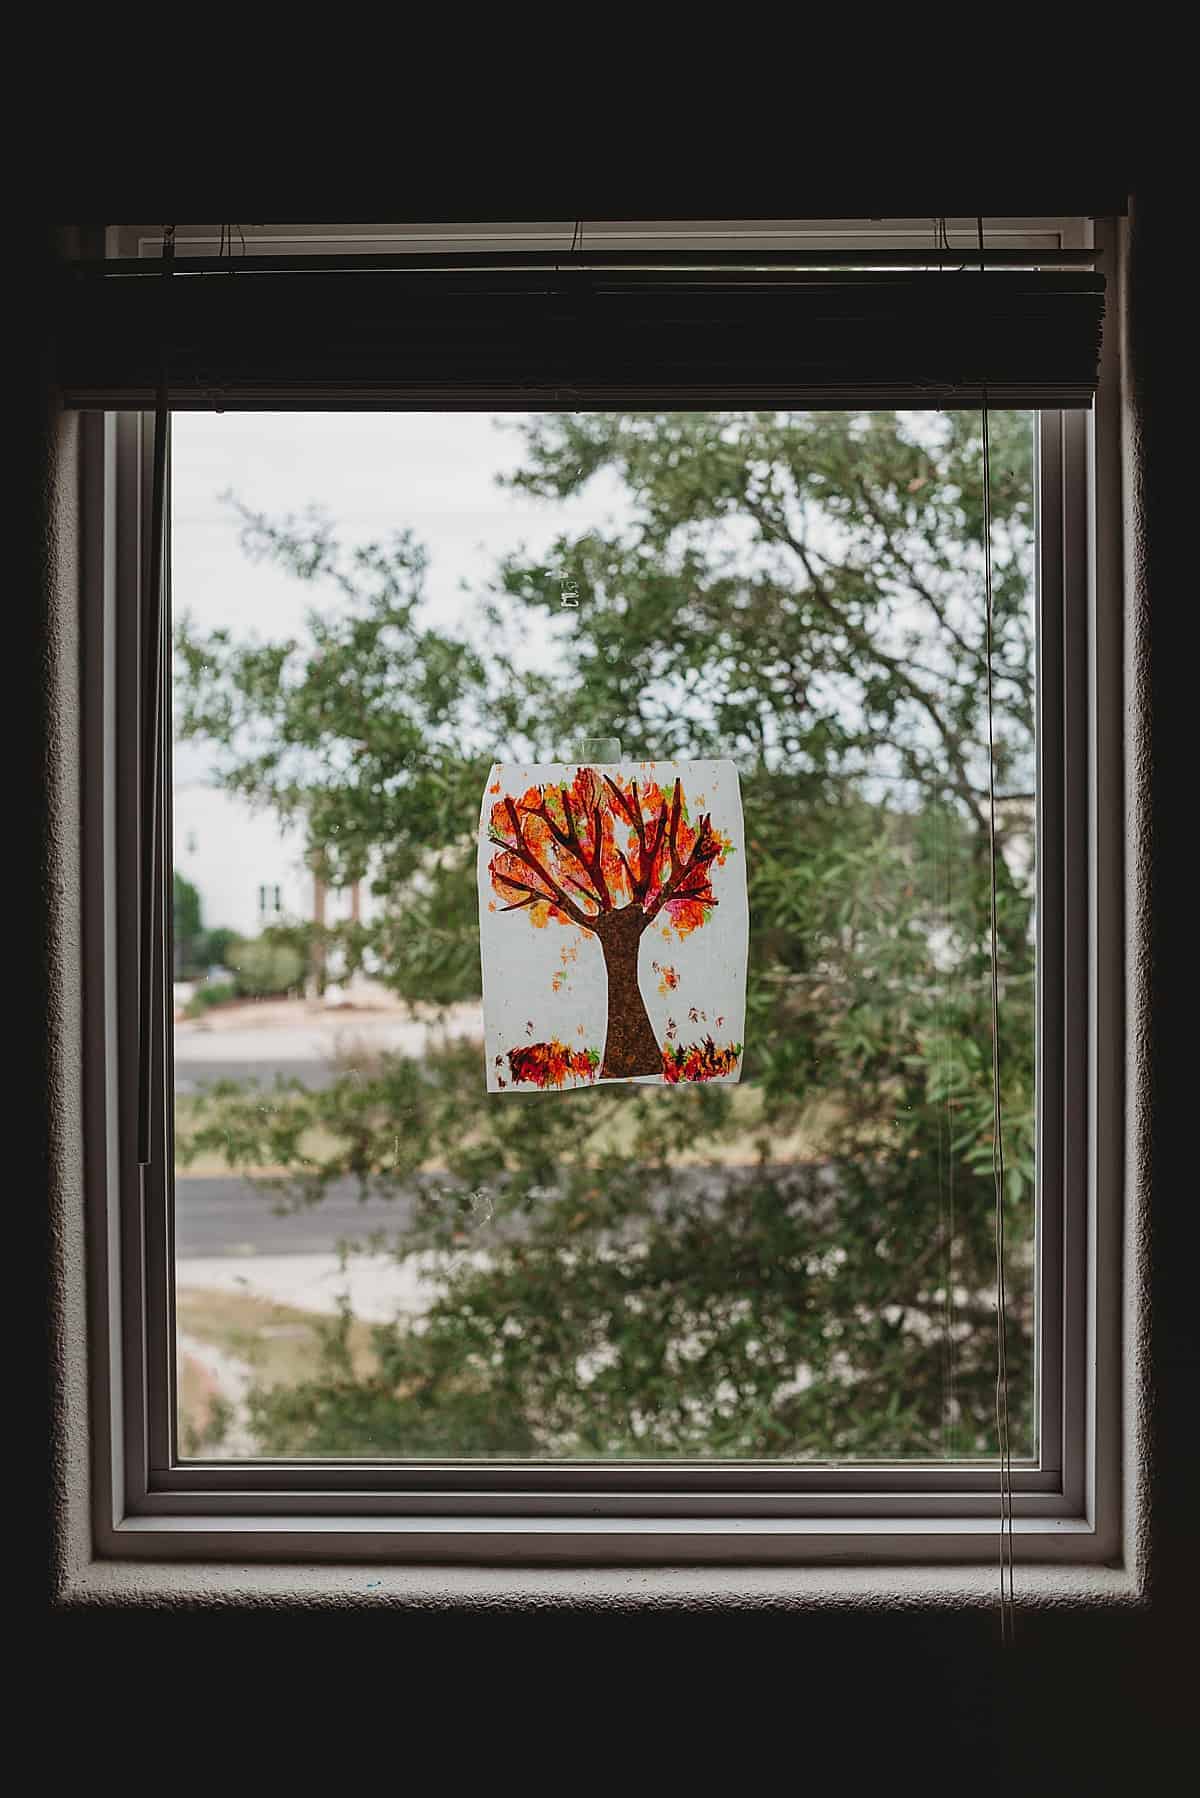 Melted crayon fall leaf art with kids